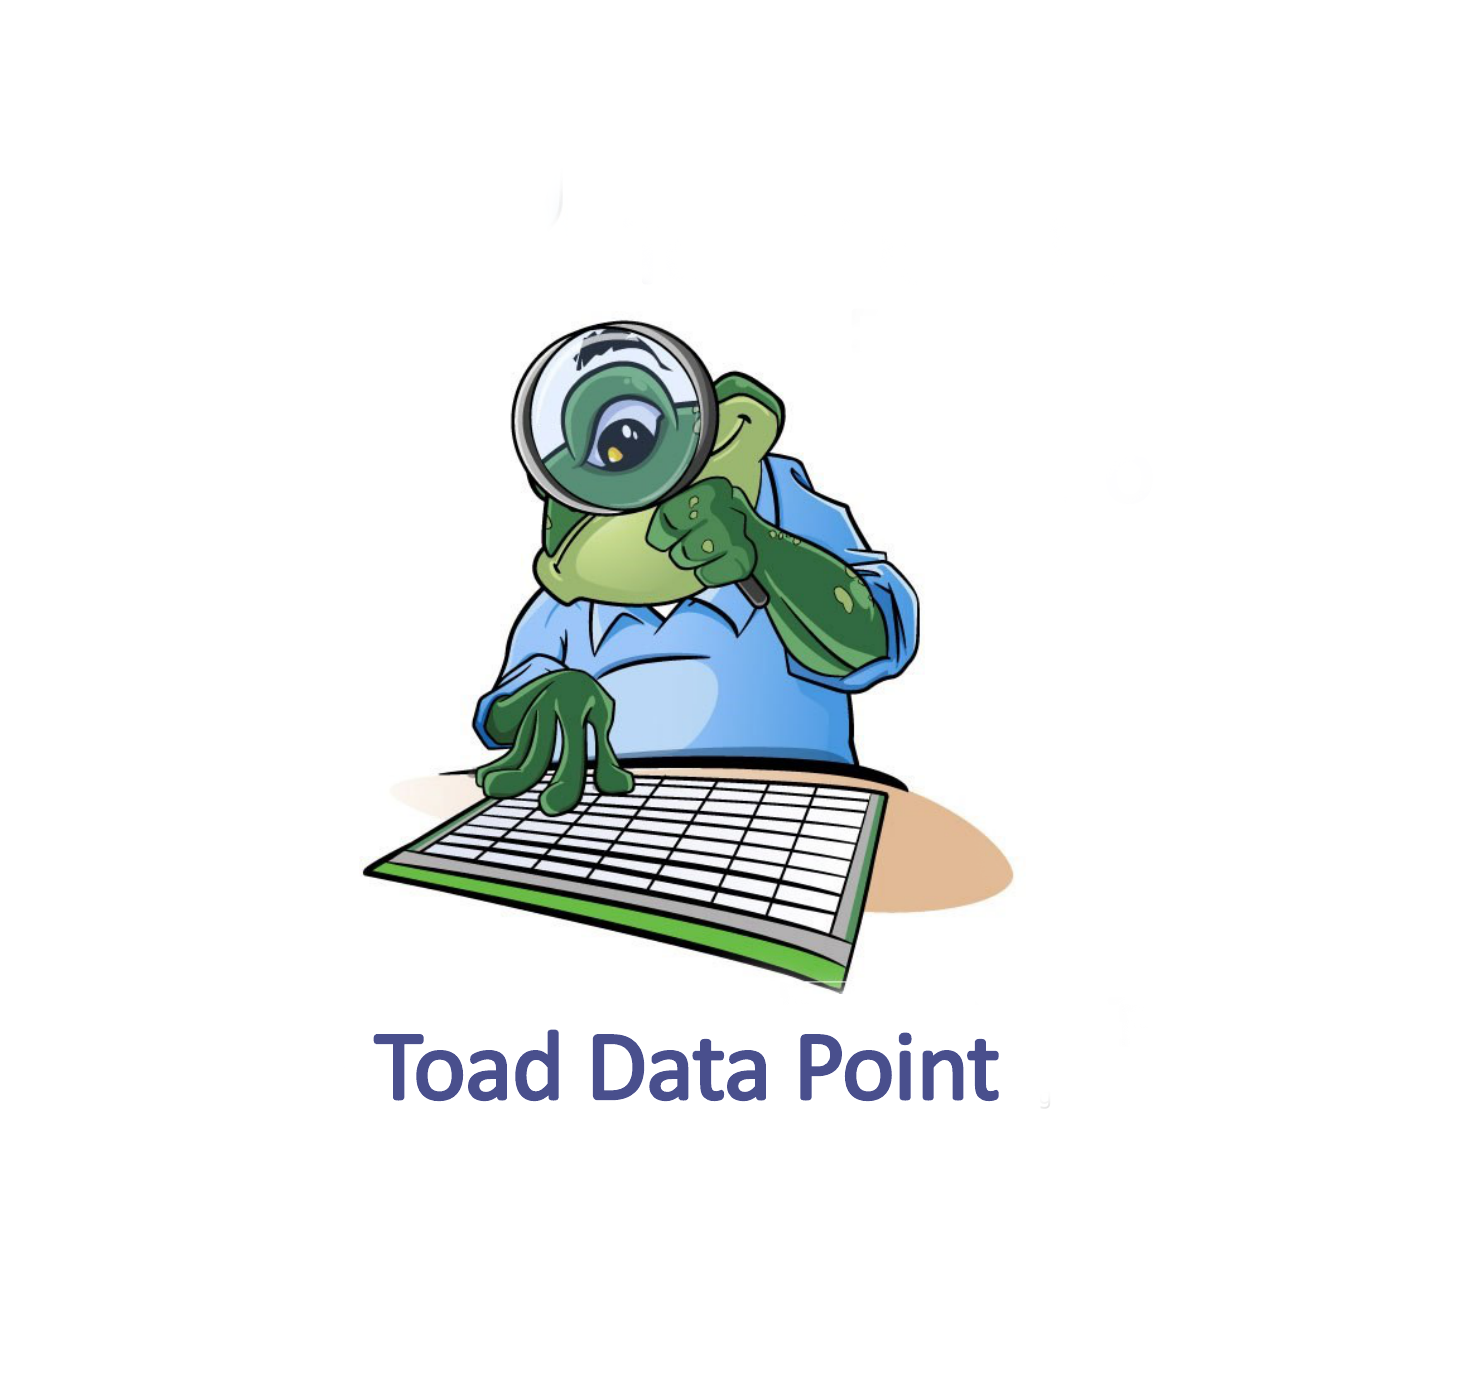 Toad Data Point